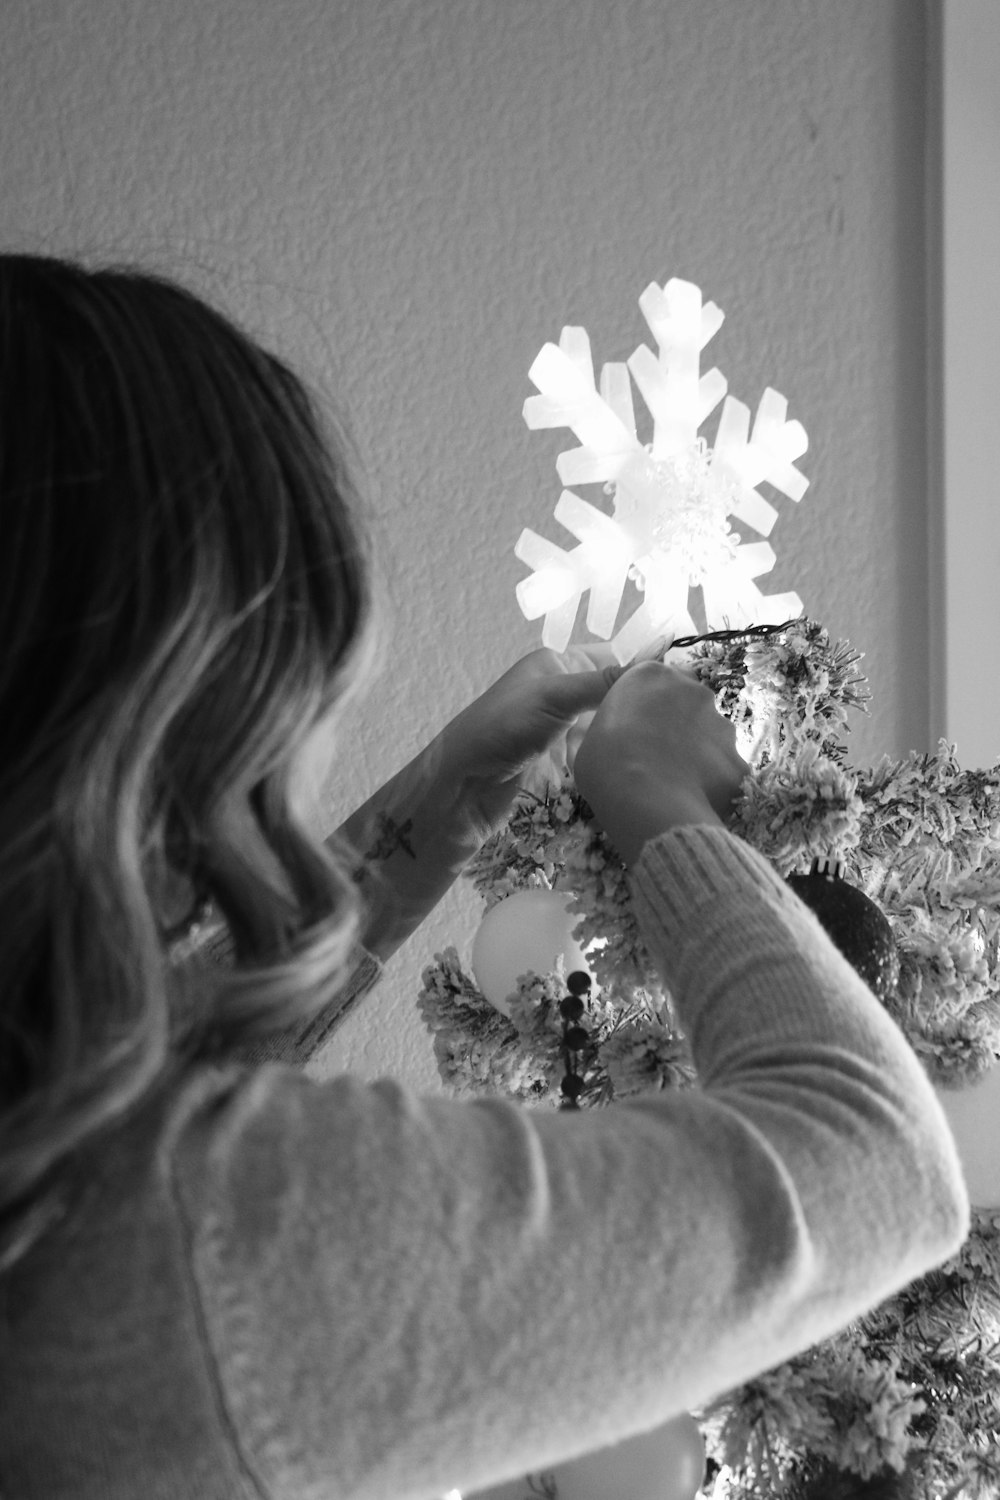 a woman decorating a christmas tree with snowflakes